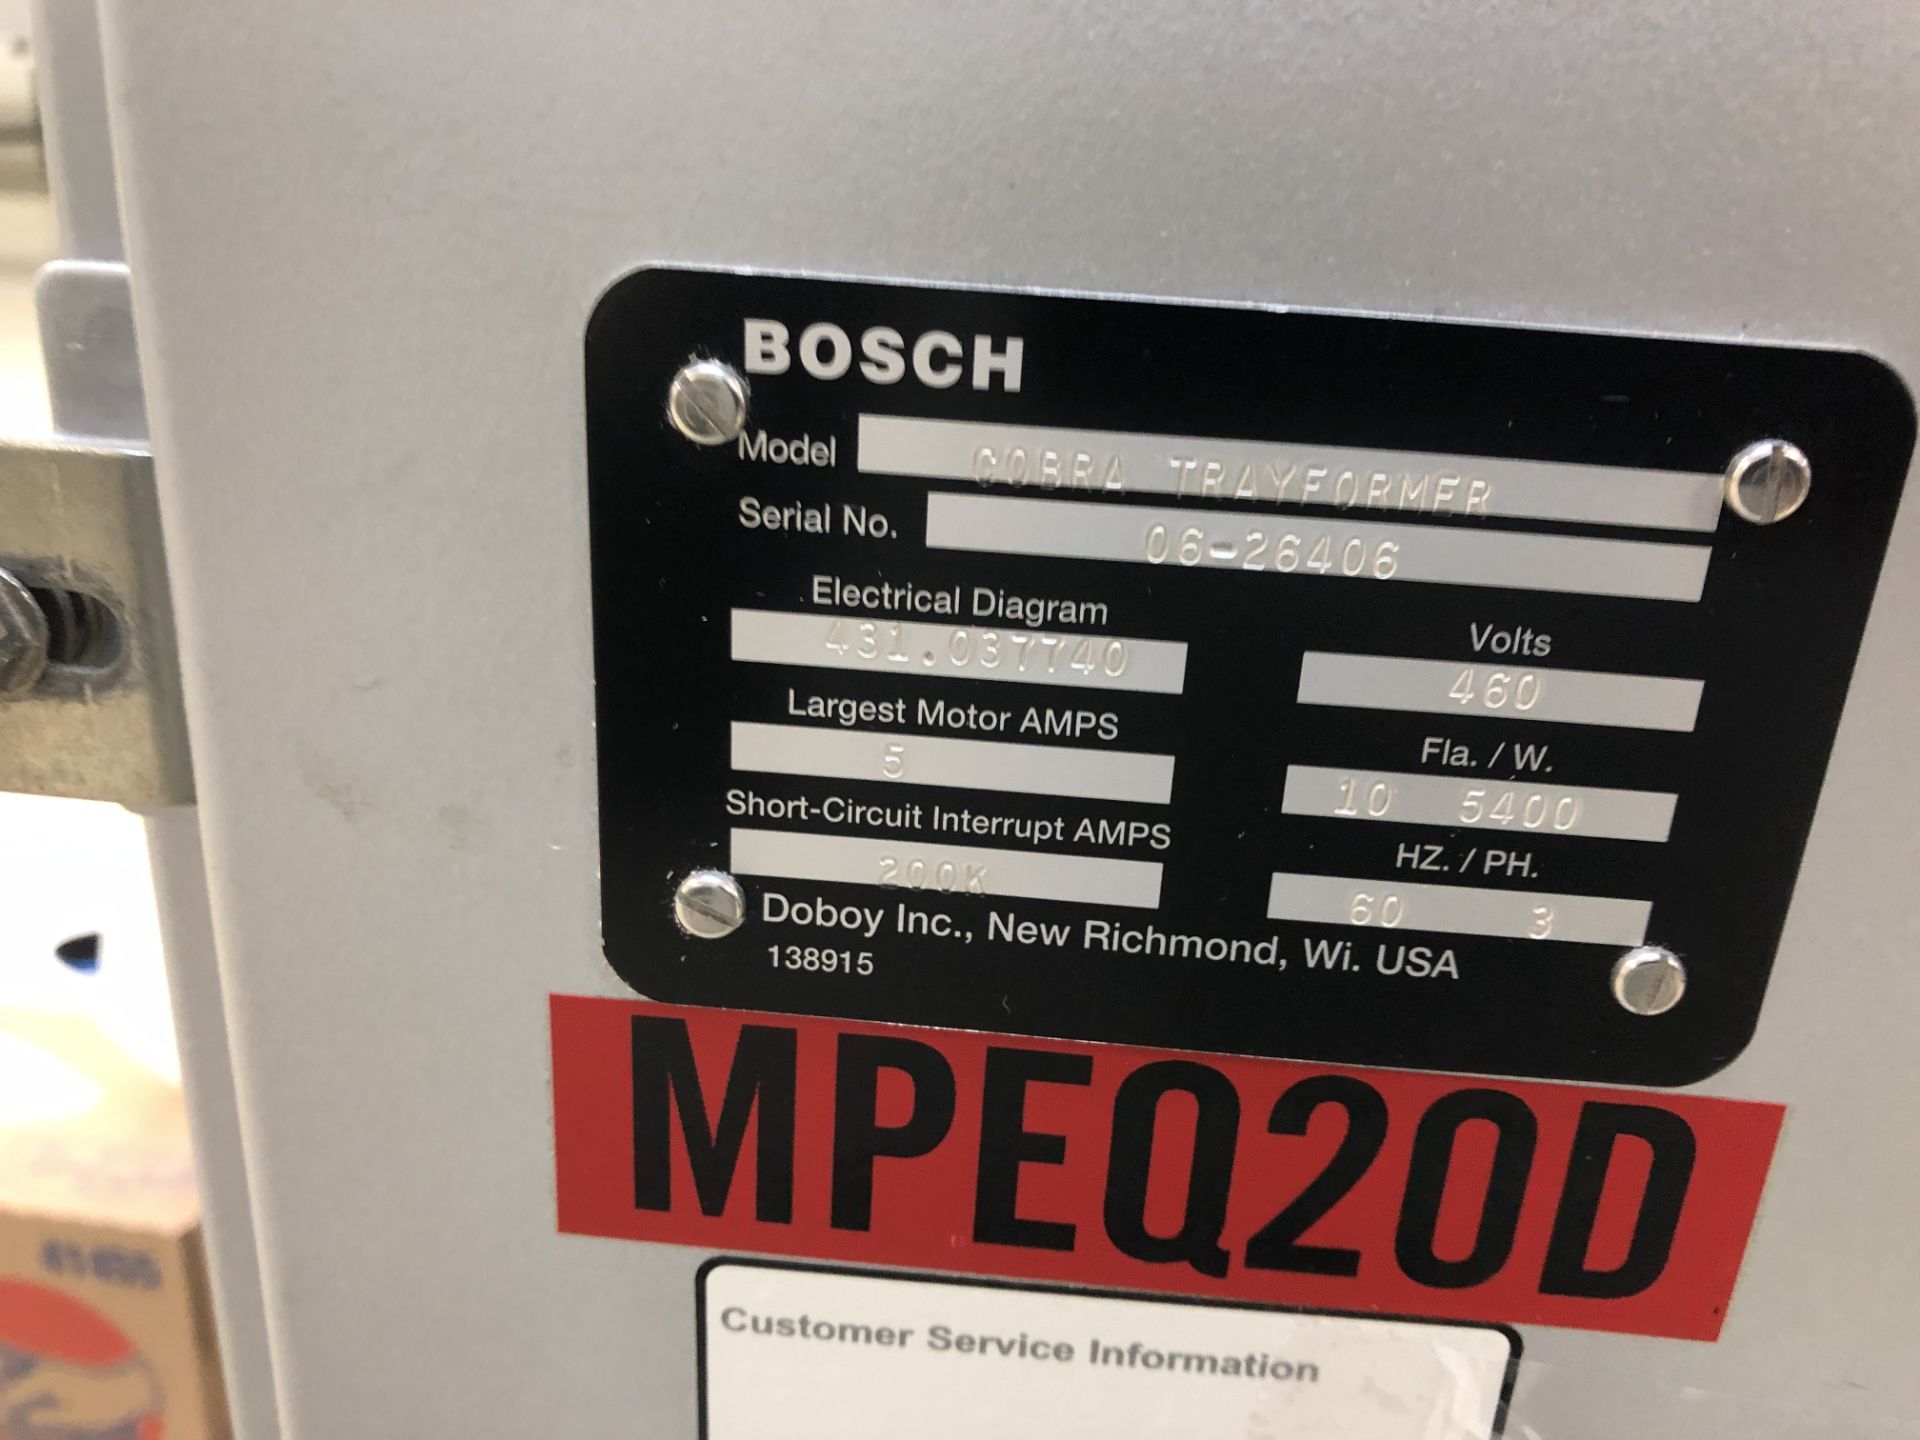 Bosch Doboy Cobra Carton Former with Nordson Hot Melt Unit, serial#06-26406 with tooling built - Image 3 of 14